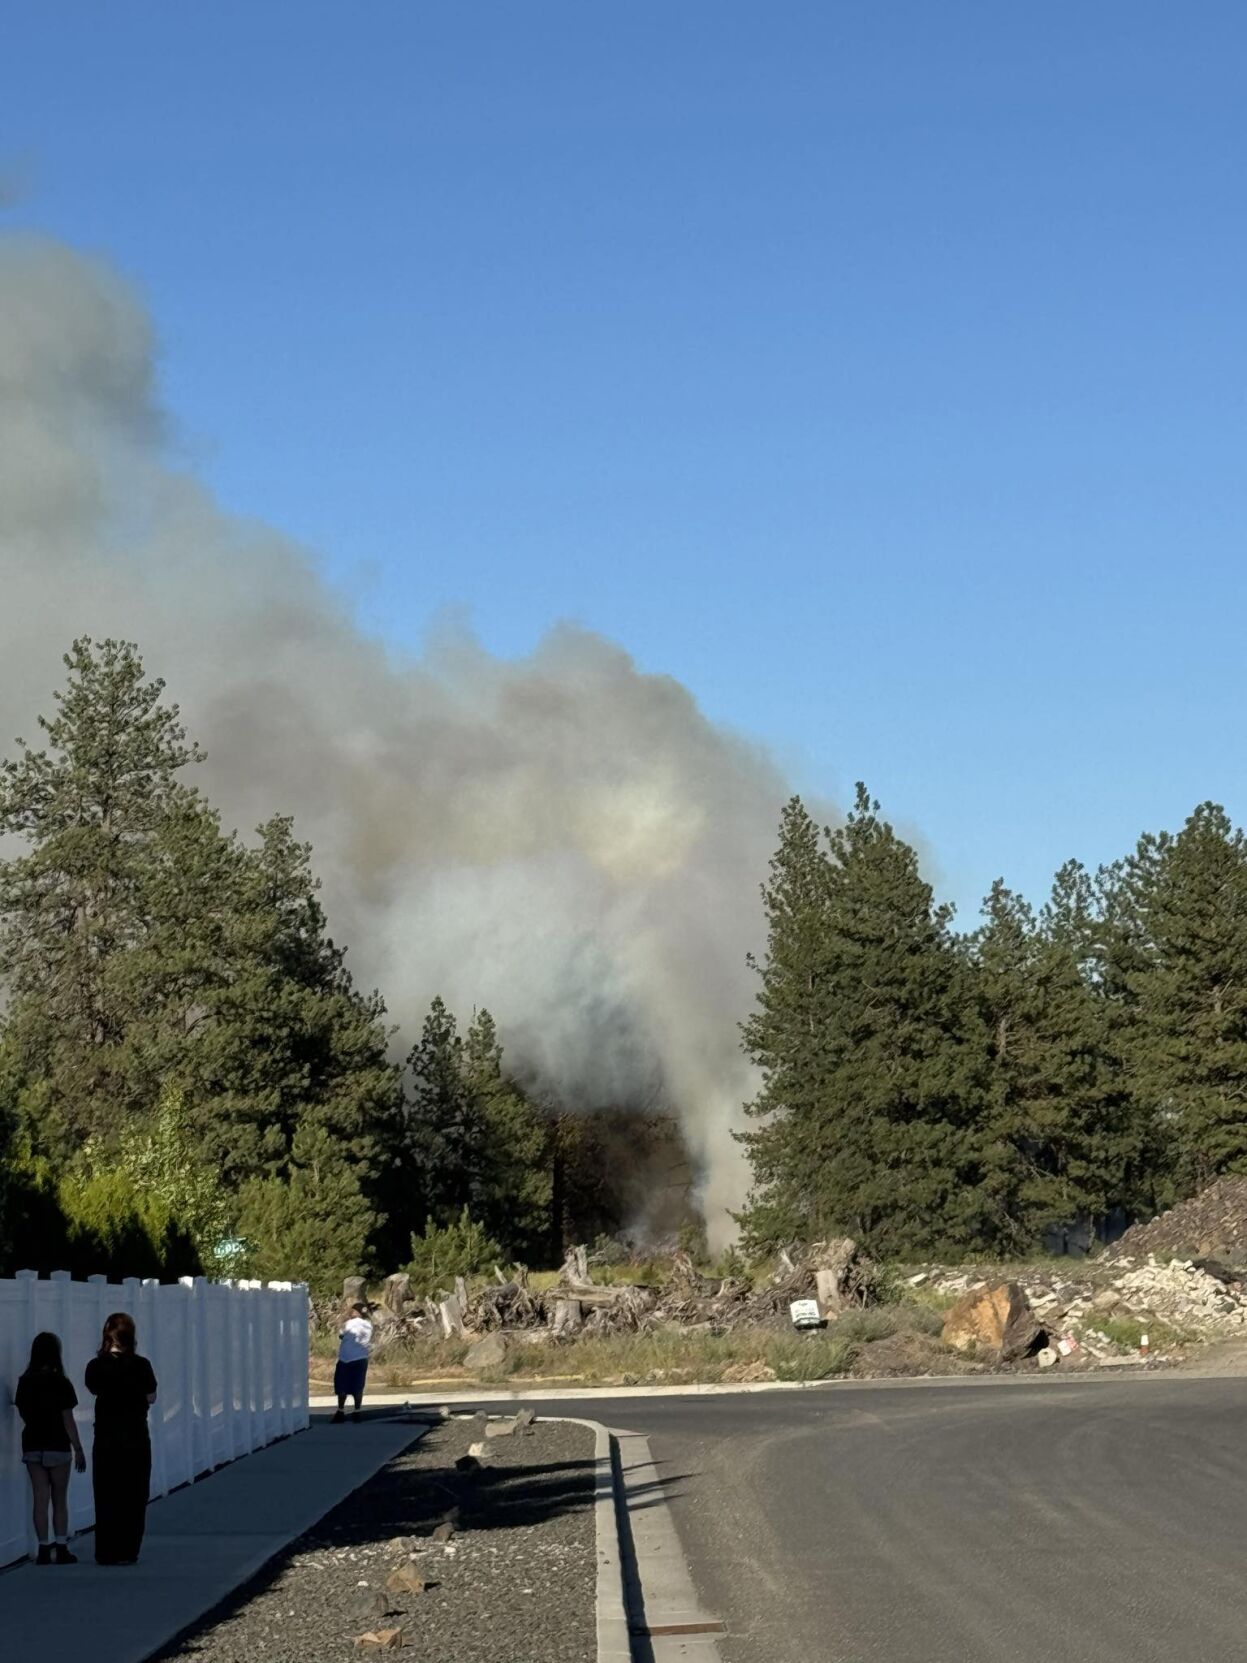 Fire crews respond to 5-to-10-acre brush fire [Video]